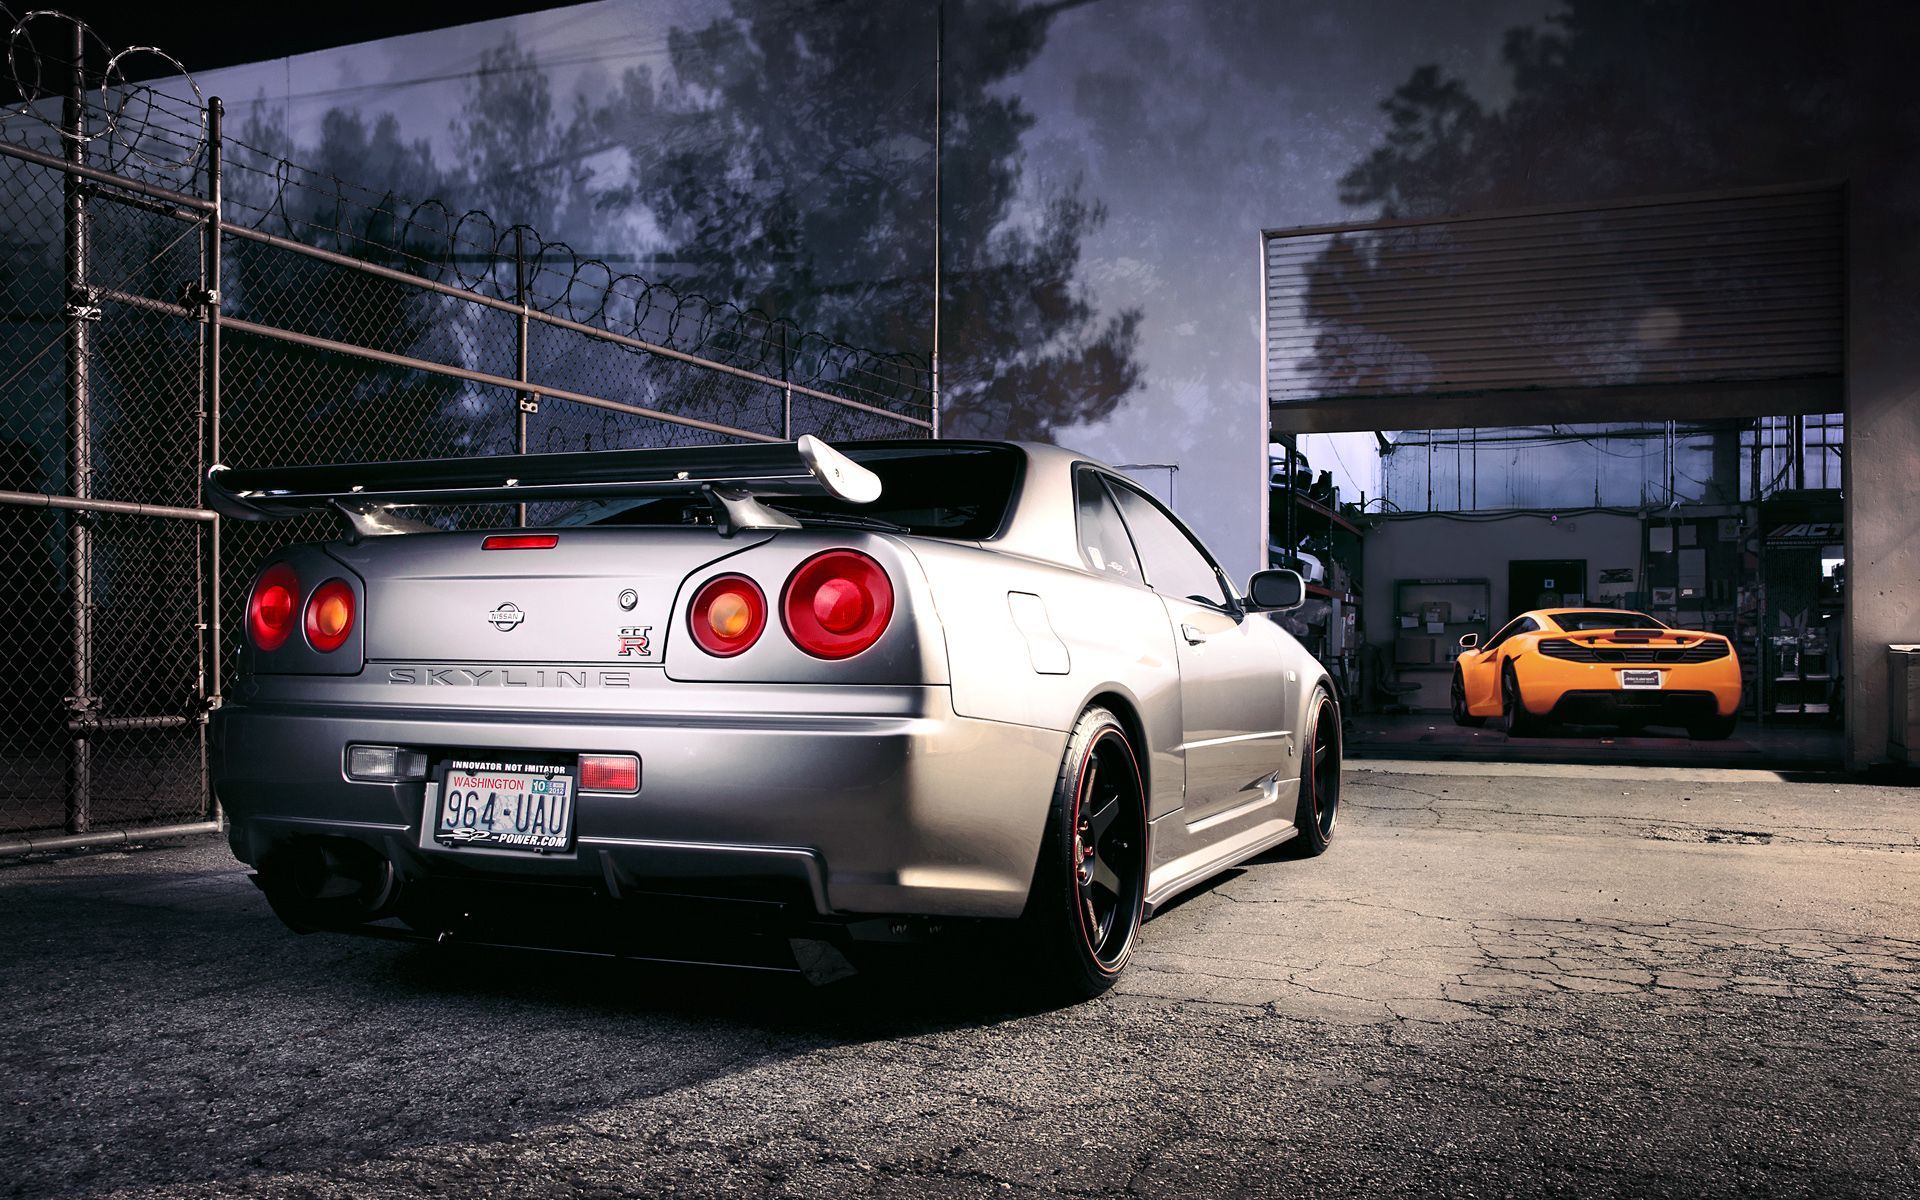 Skyline R34 Wallpapers Group